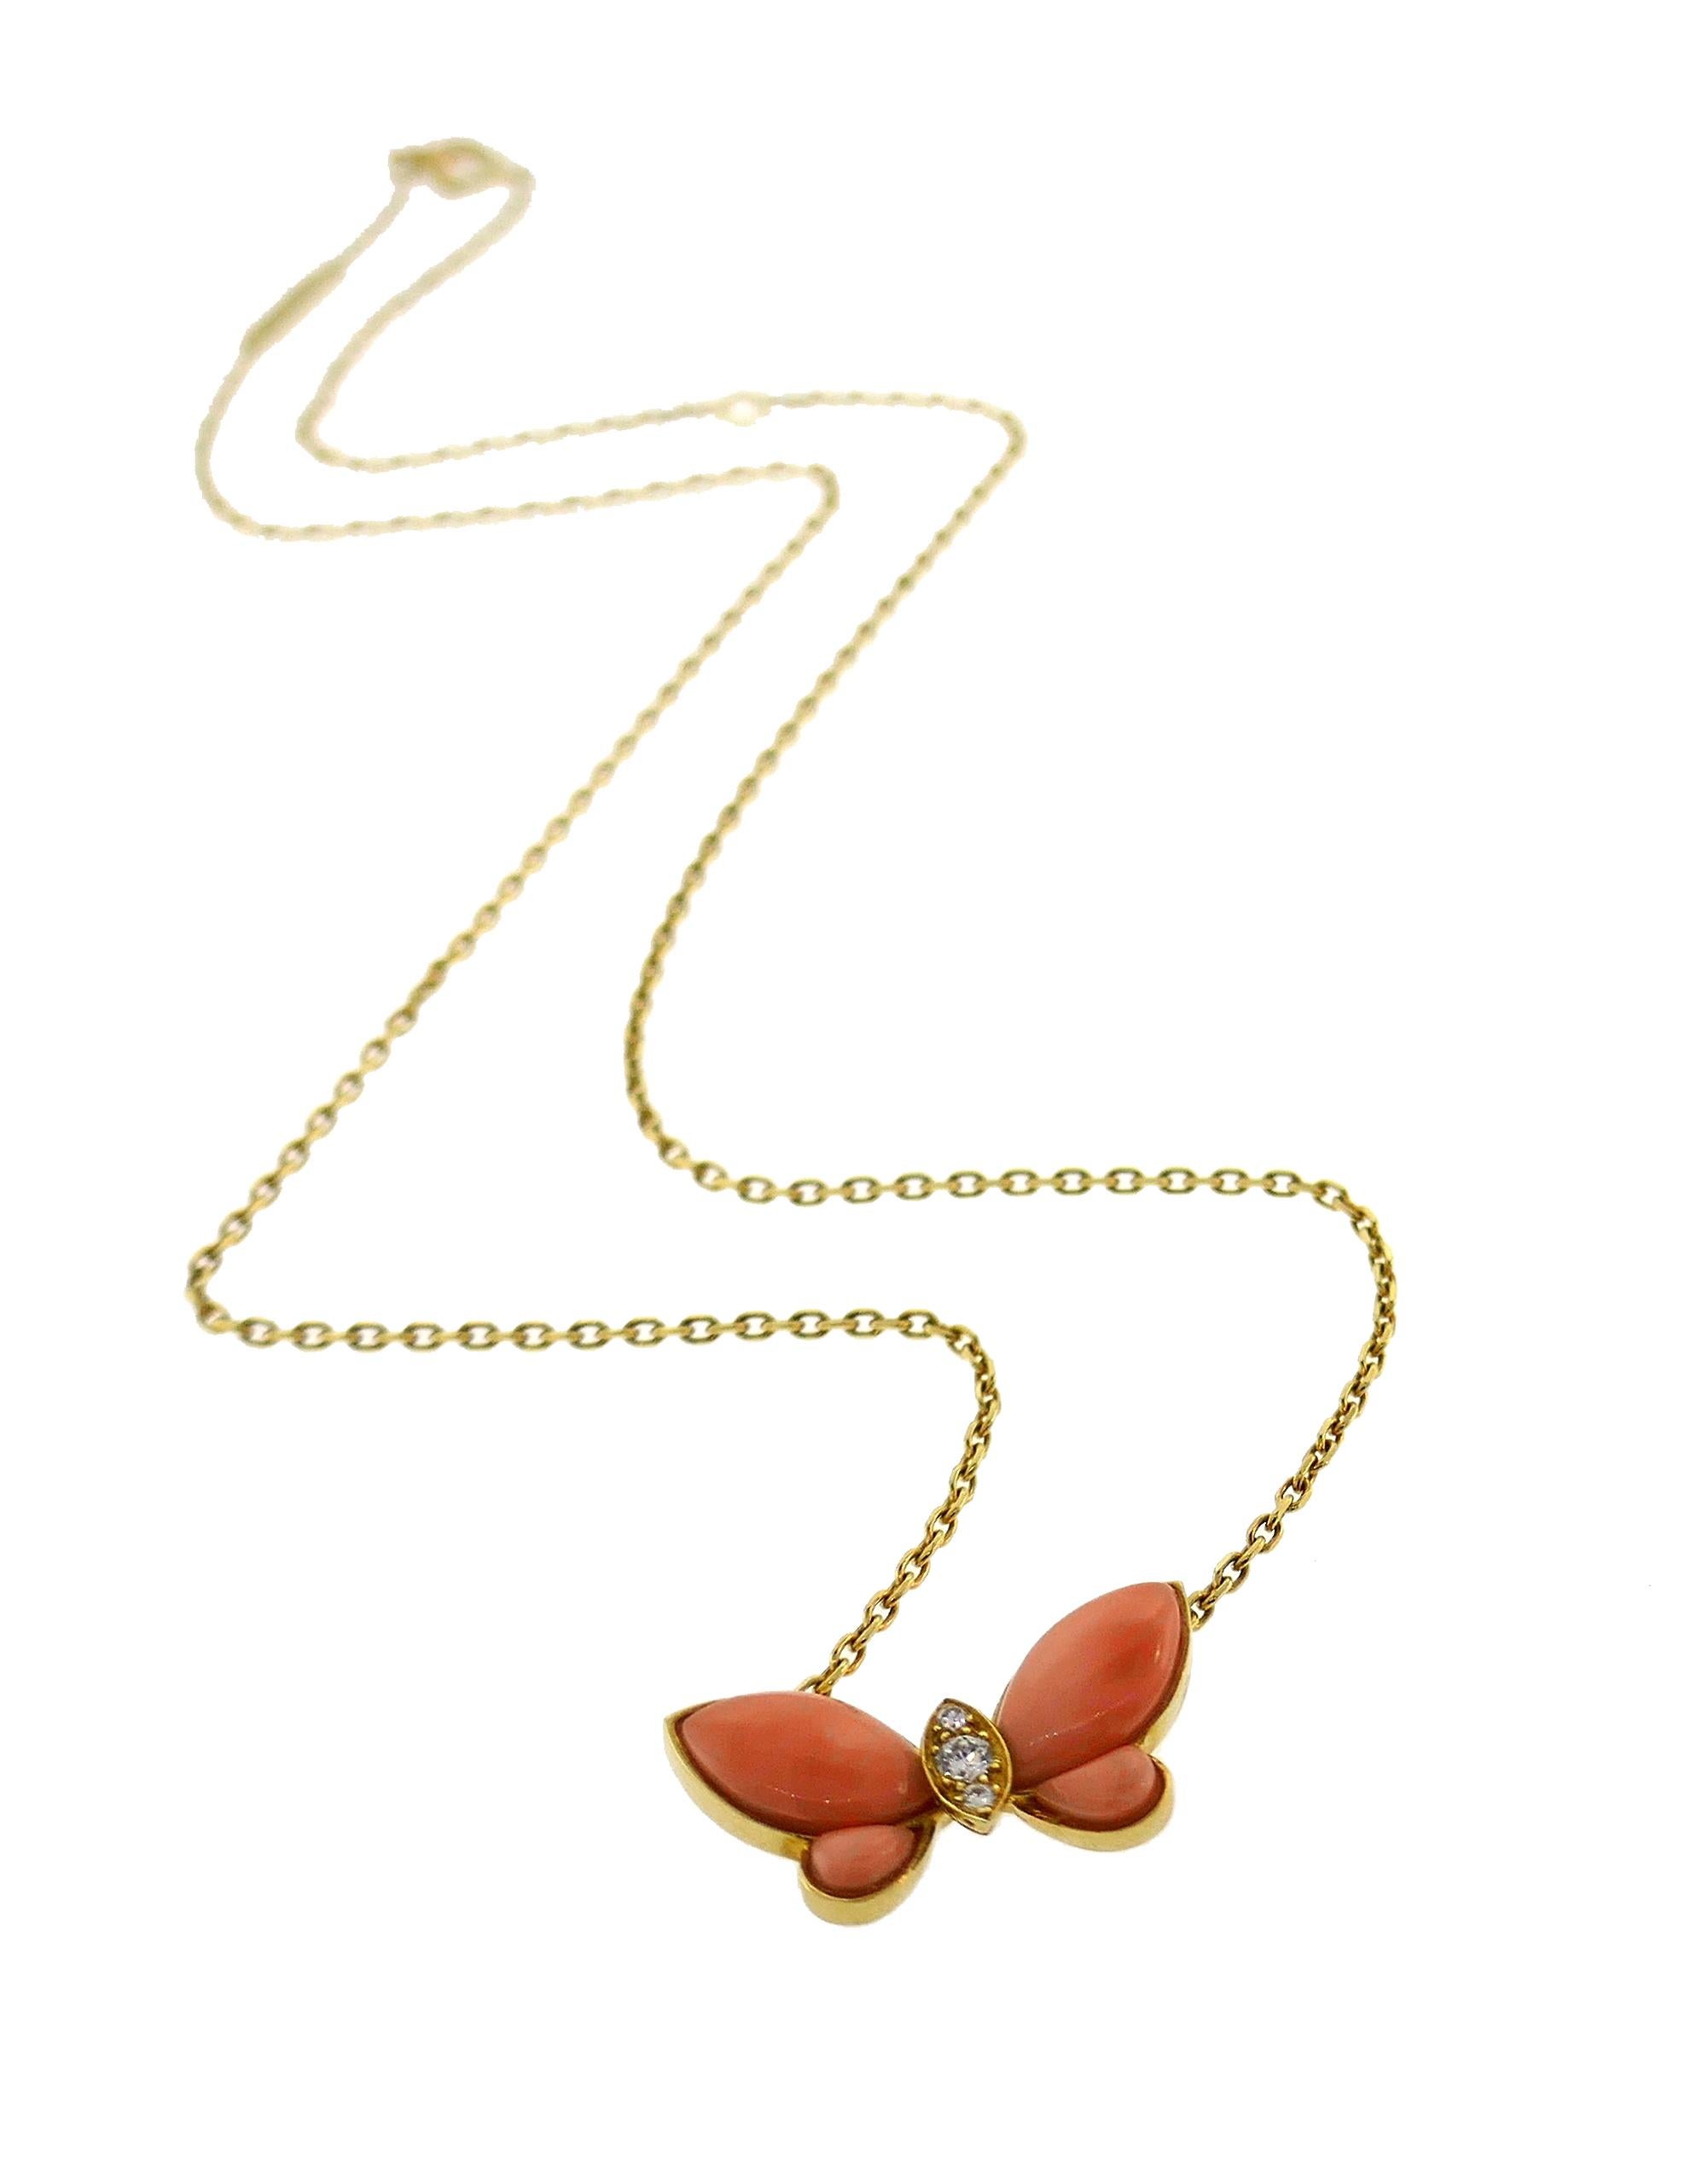 Women's Van Cleef & Arpels Butterfly Pendant Necklace in Yellow Gold Diamond Coral